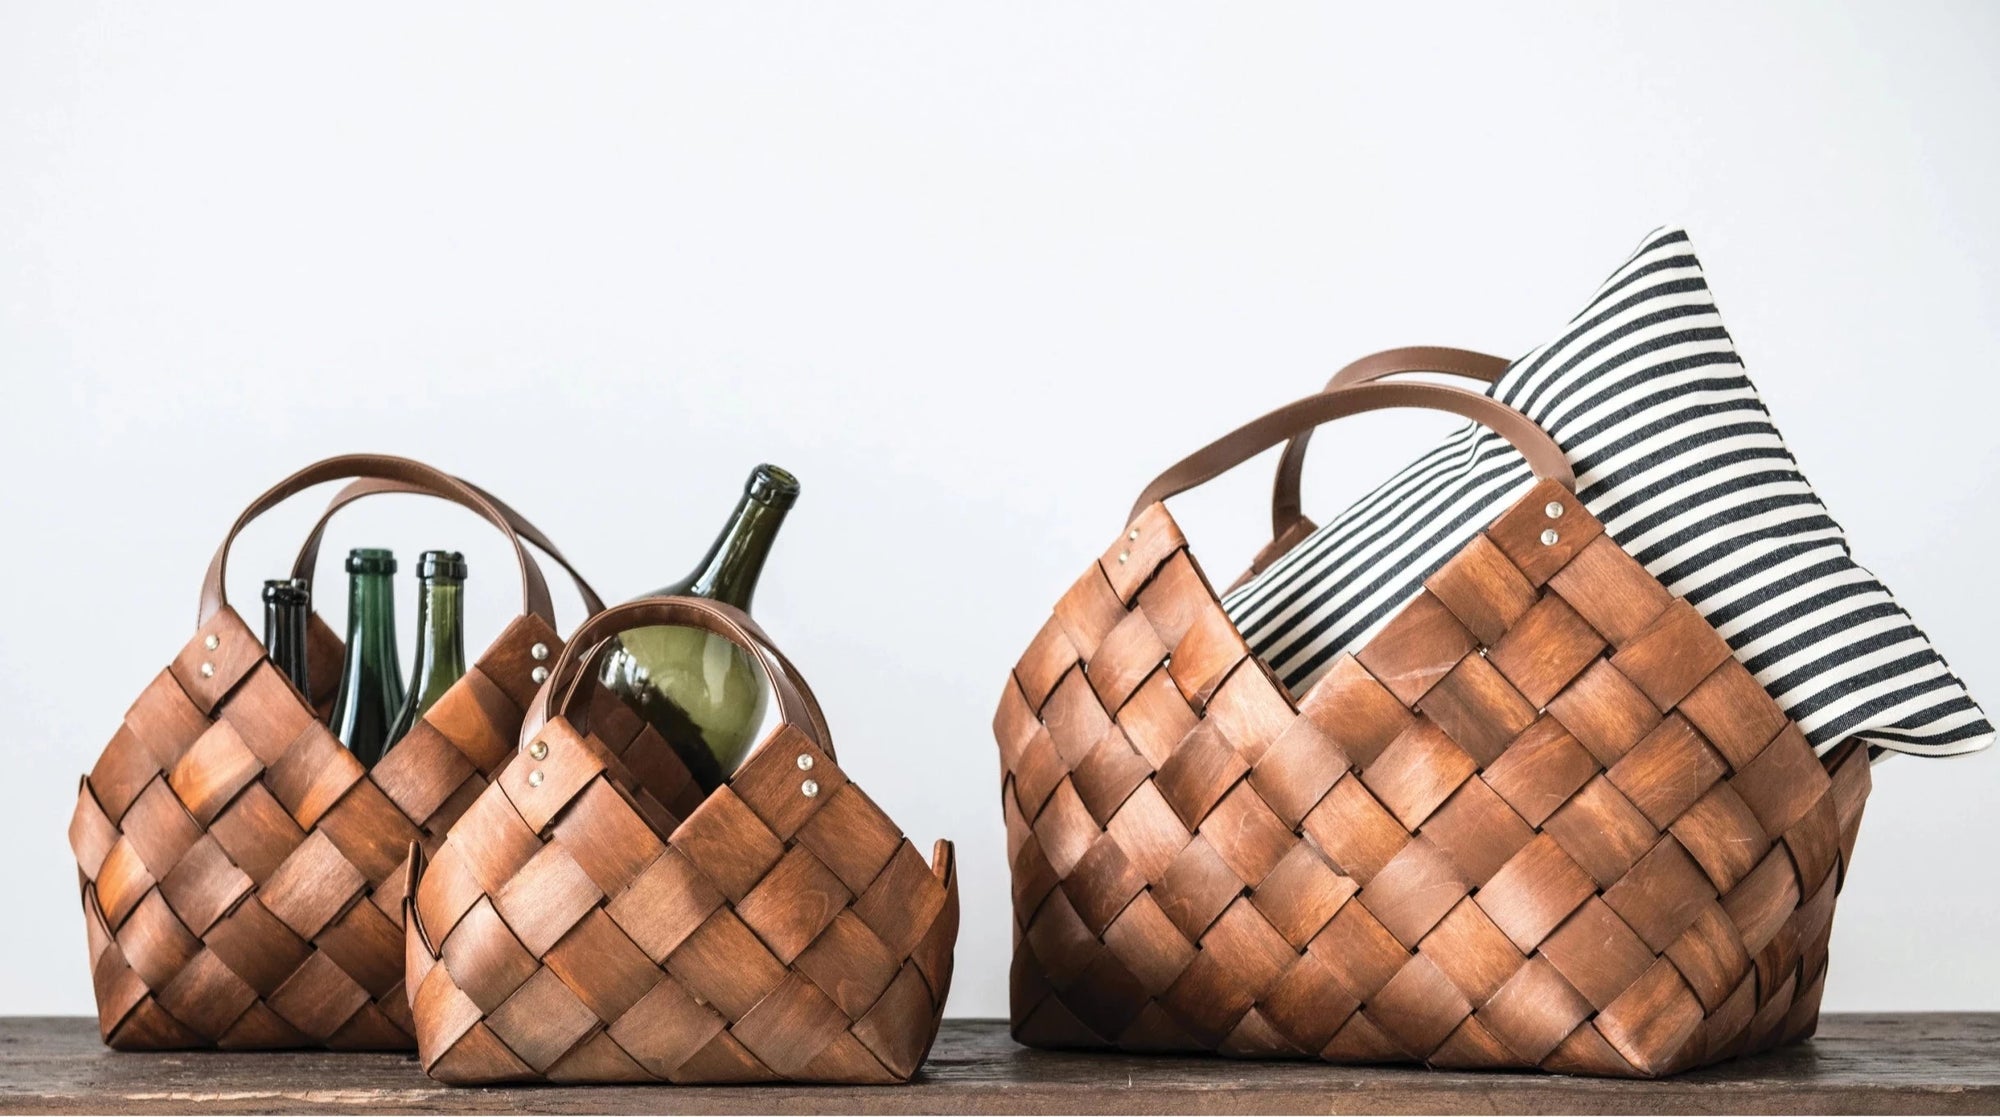 woven wood baskets with handles in 3 sizes